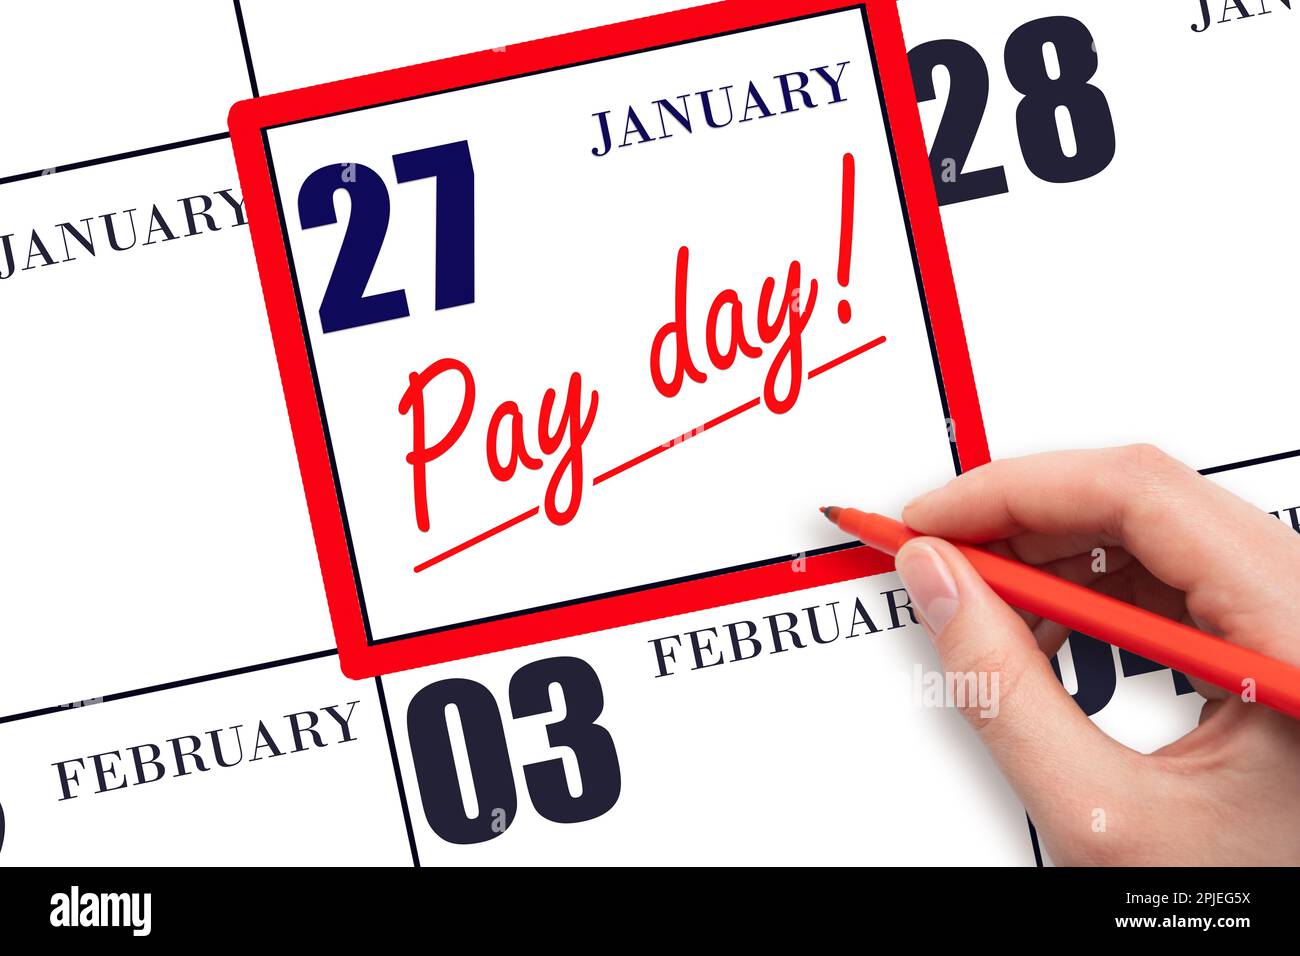 27th day of January. Hand writing text PAY DATE on calendar date January 27 and underline it. Payment due date. Reminder concept of payment. Winter mo Stock Photo